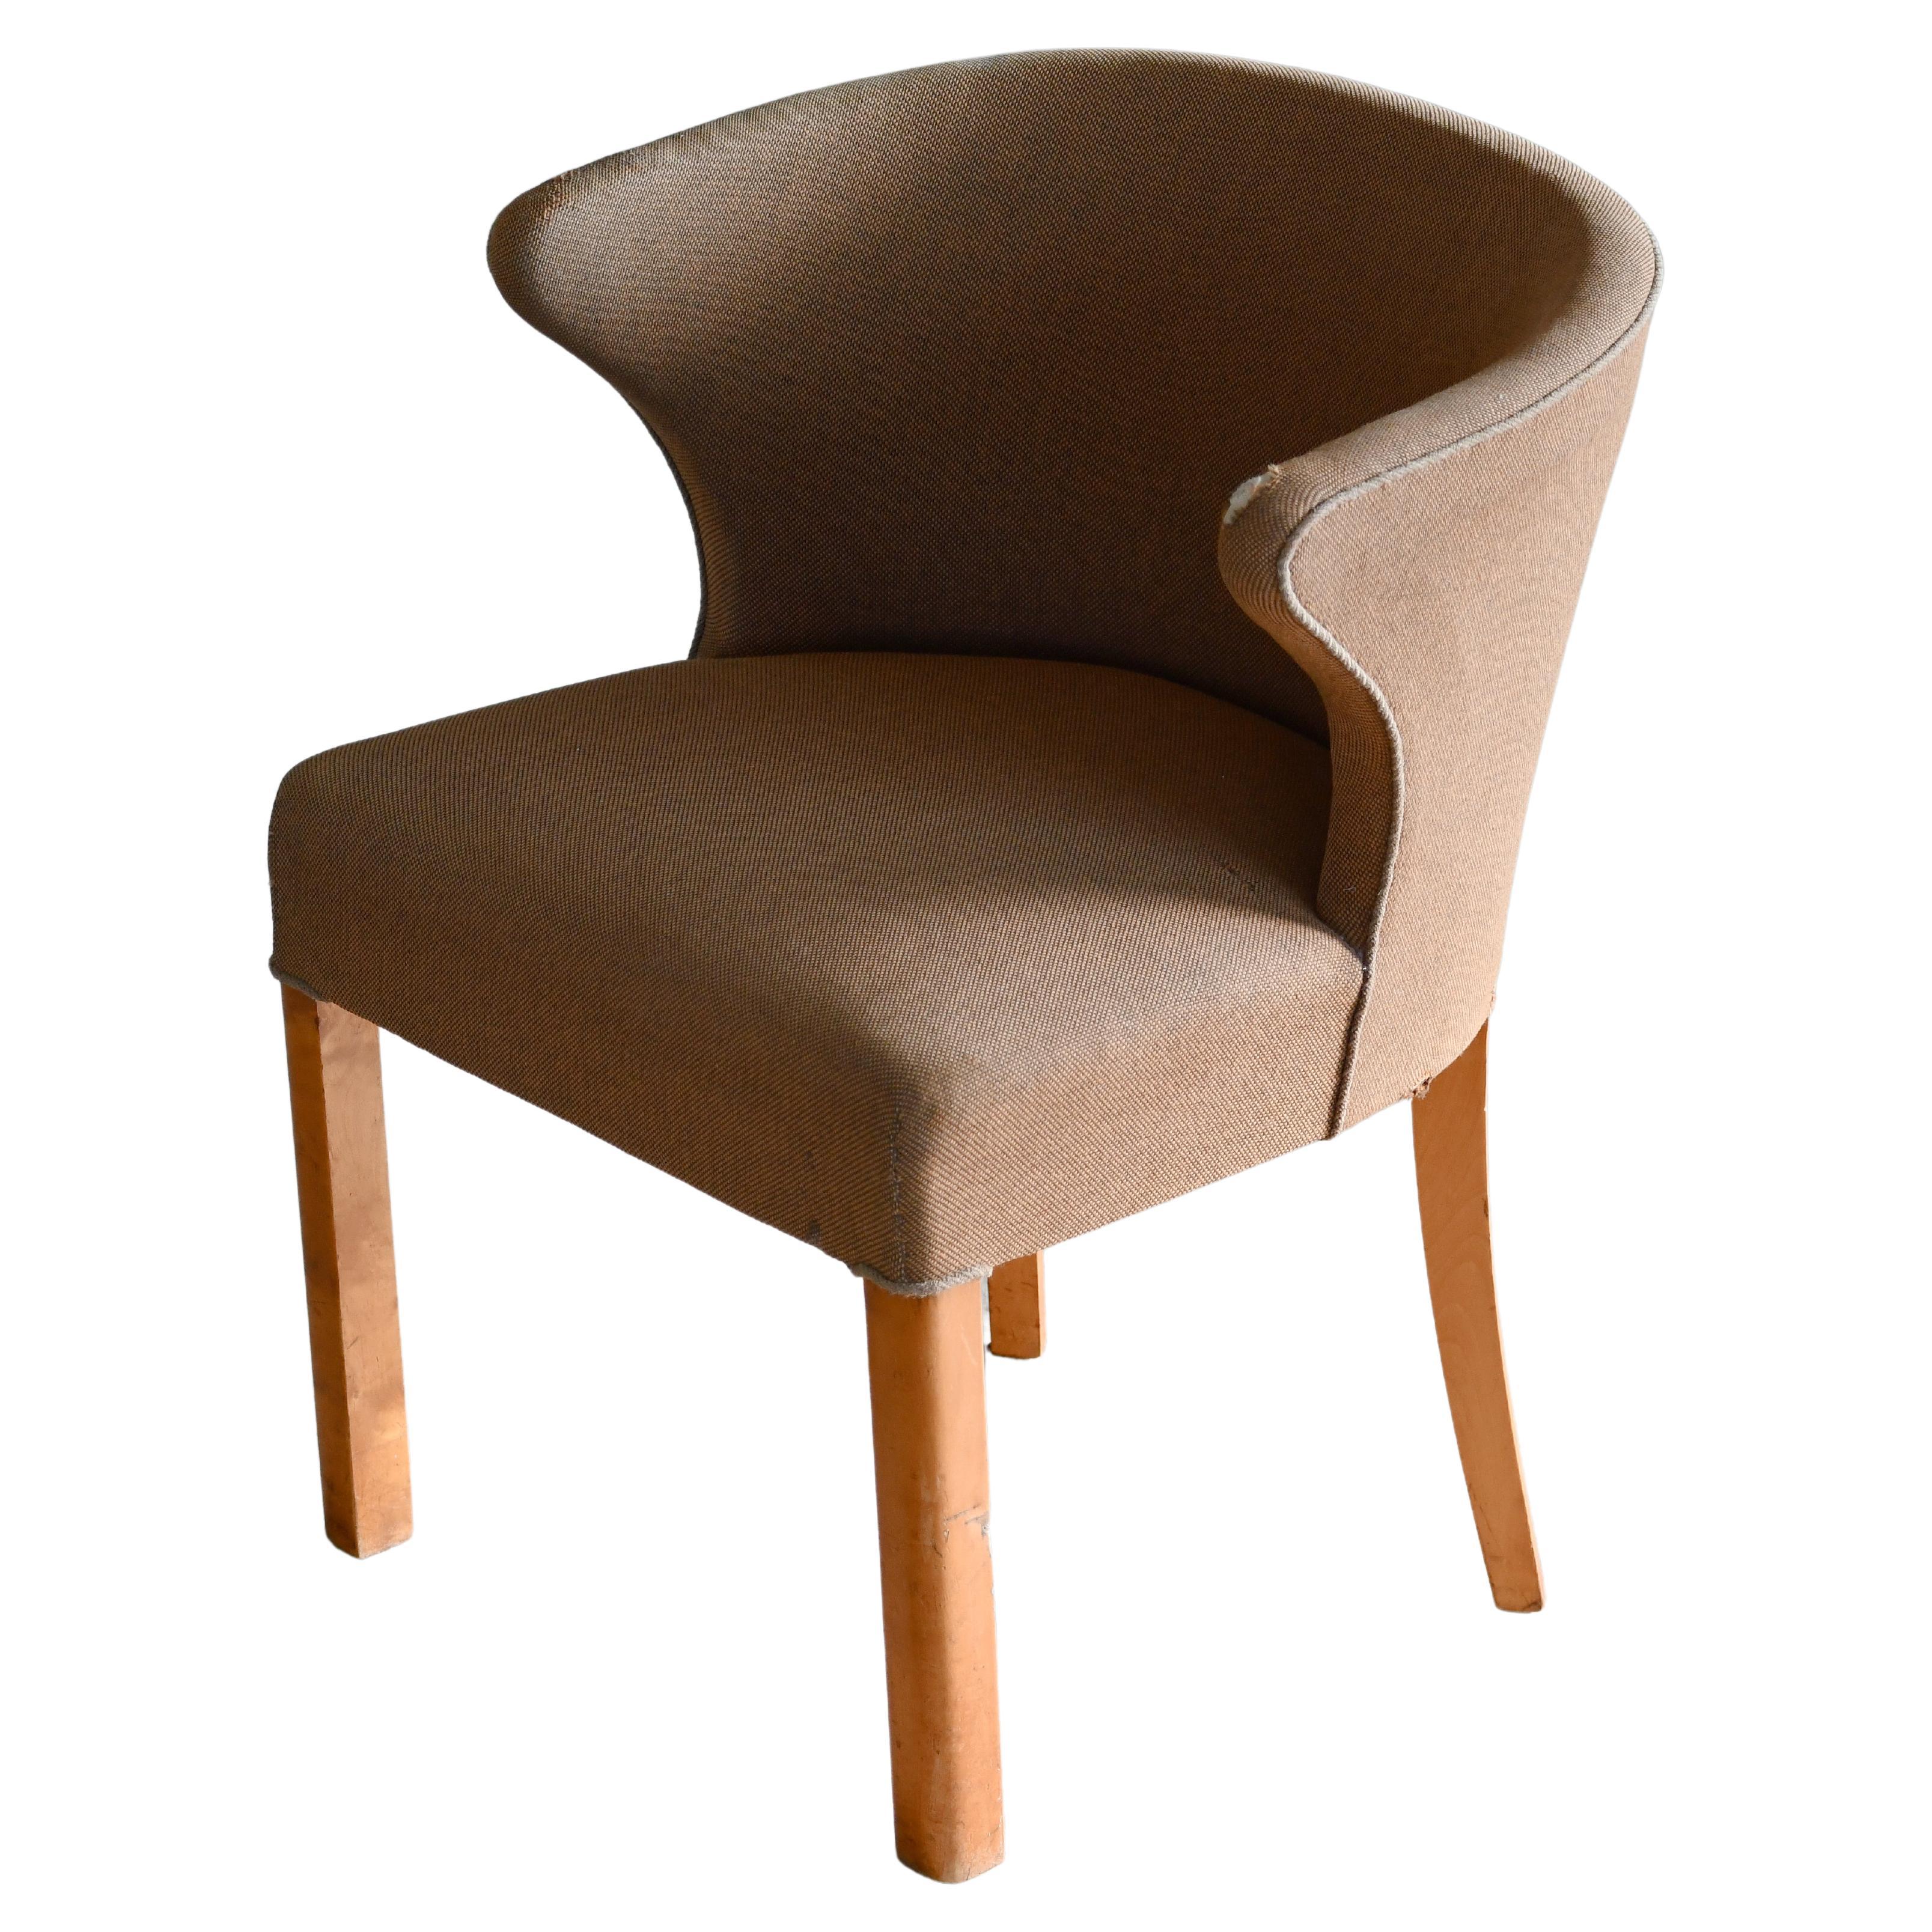 1940's Danish Accent or Armchair in style of Fritz Hansen Natural Maple Legs